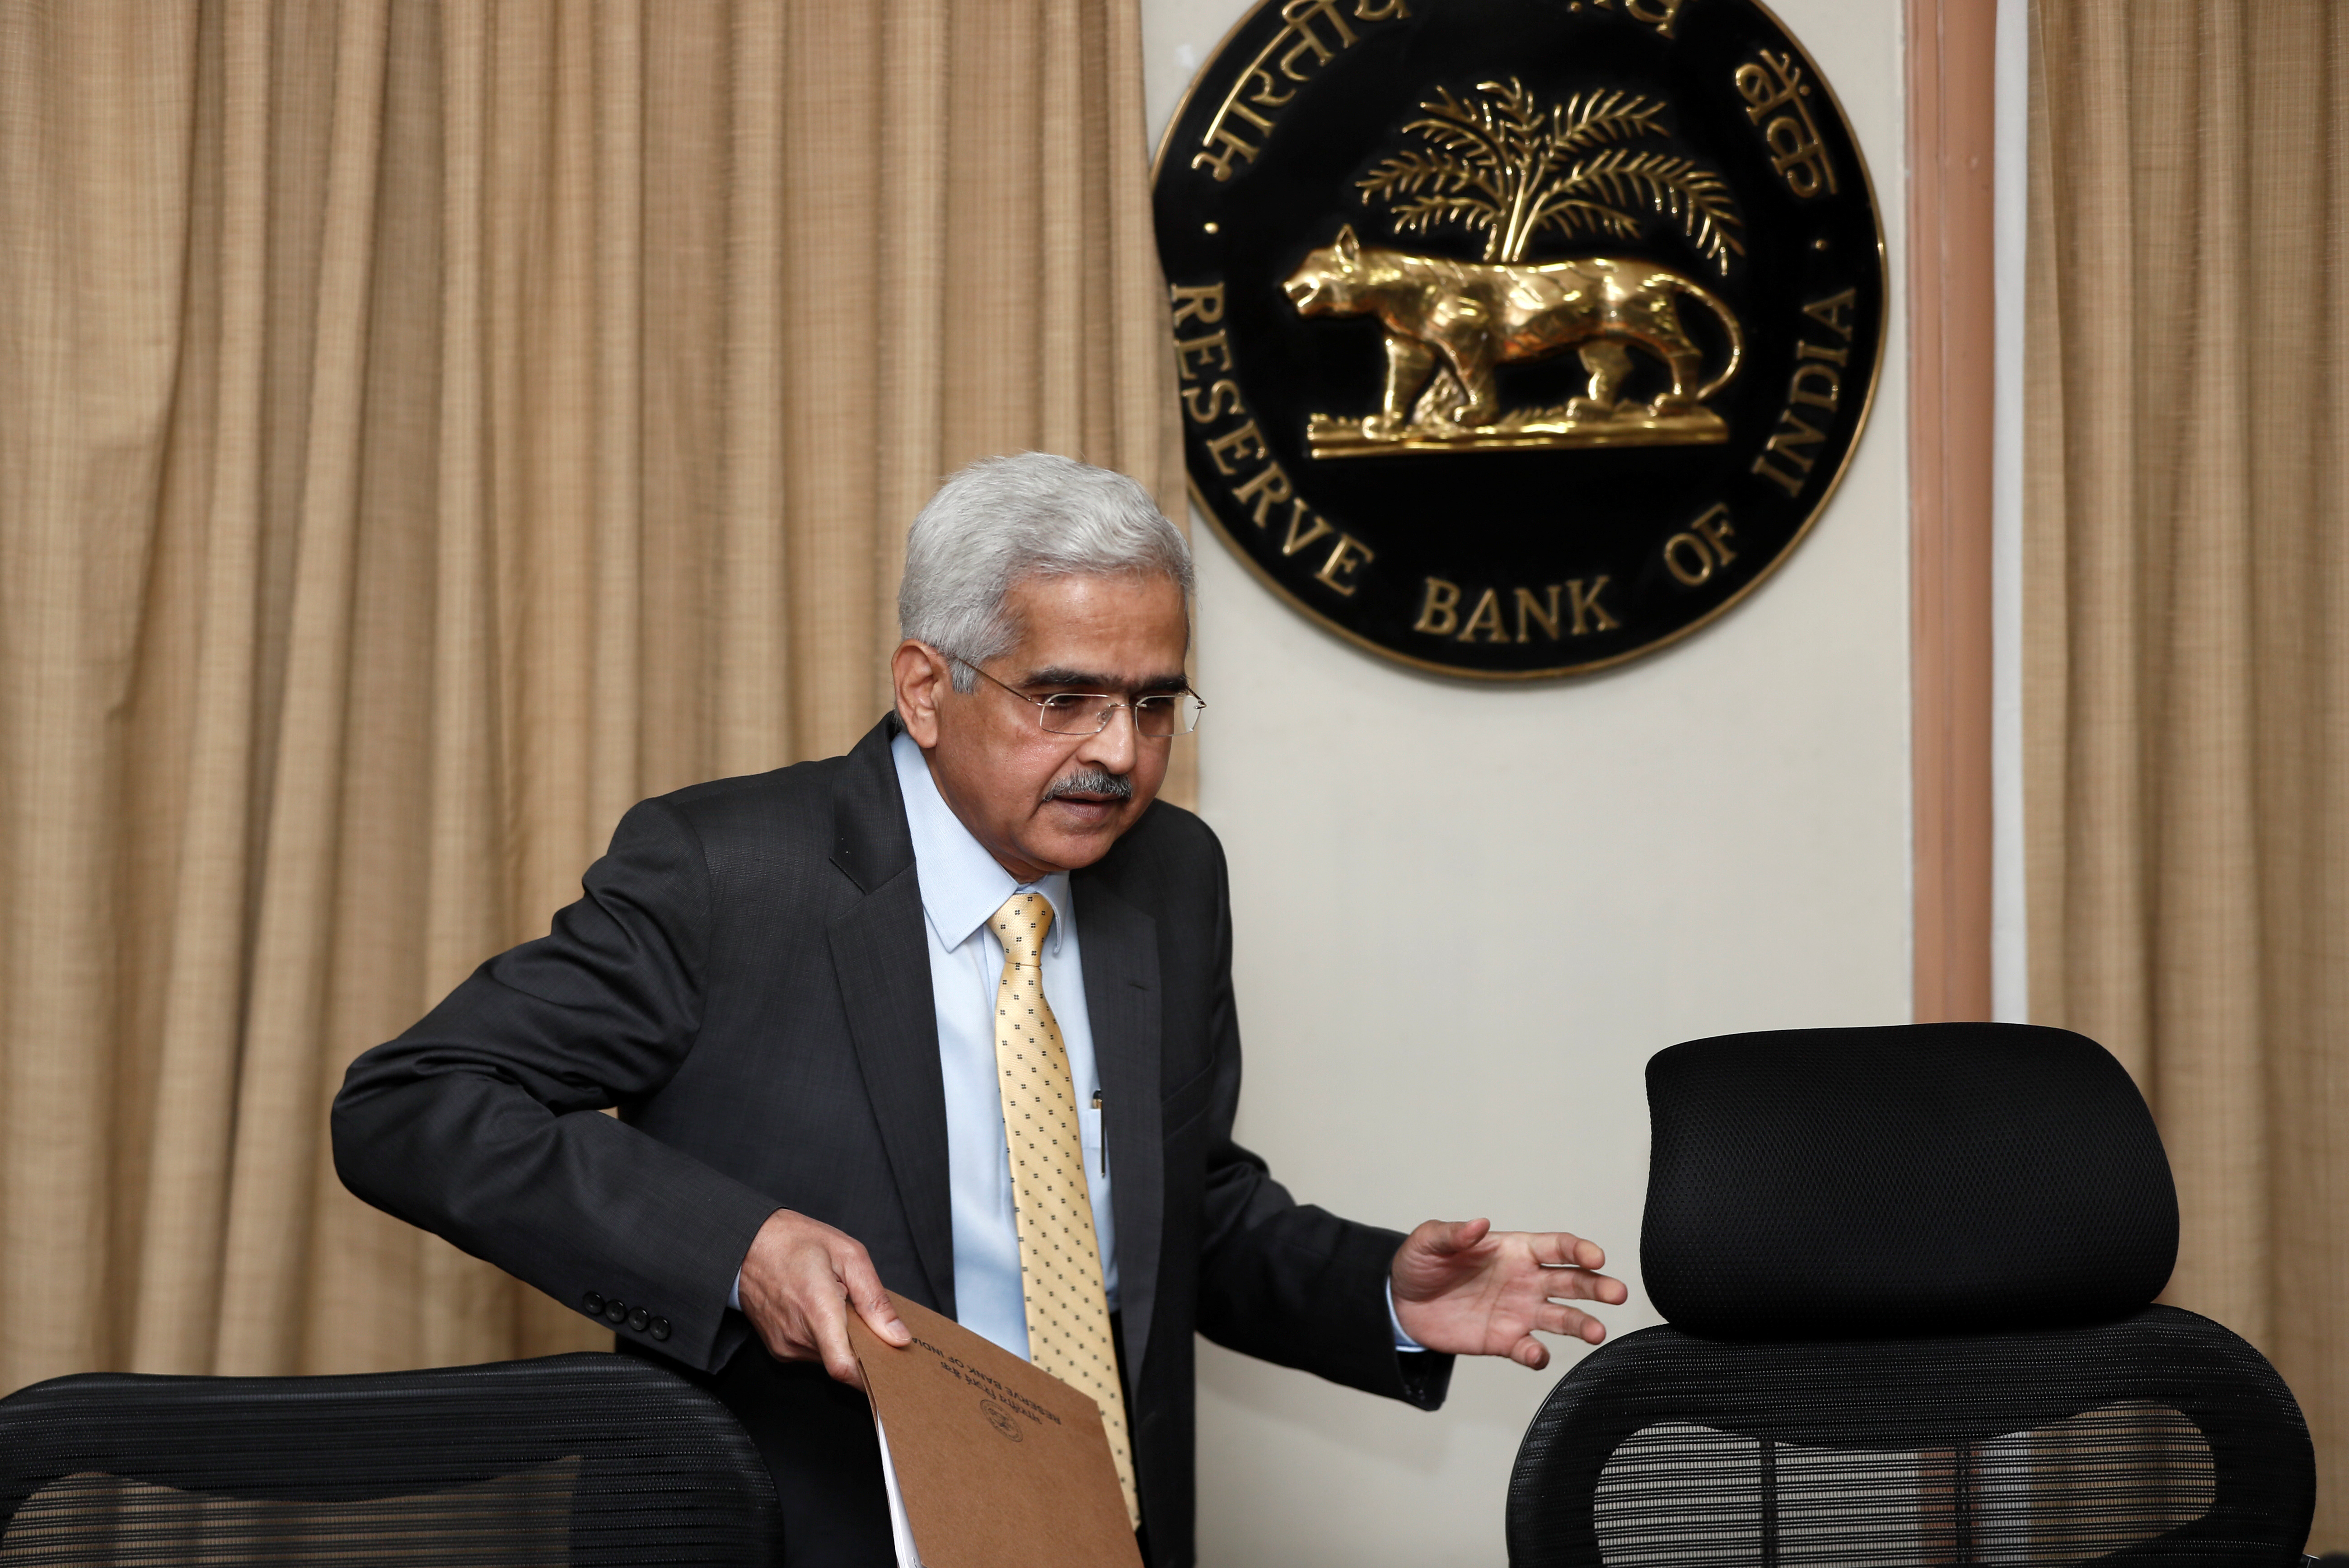 The Reserve Bank of India (RBI) Governor Shaktikanta Das arrives at a news conference after a monetary policy review in Mumbai, India, February 6, 2020. REUTERS/Francis Mascarenhas